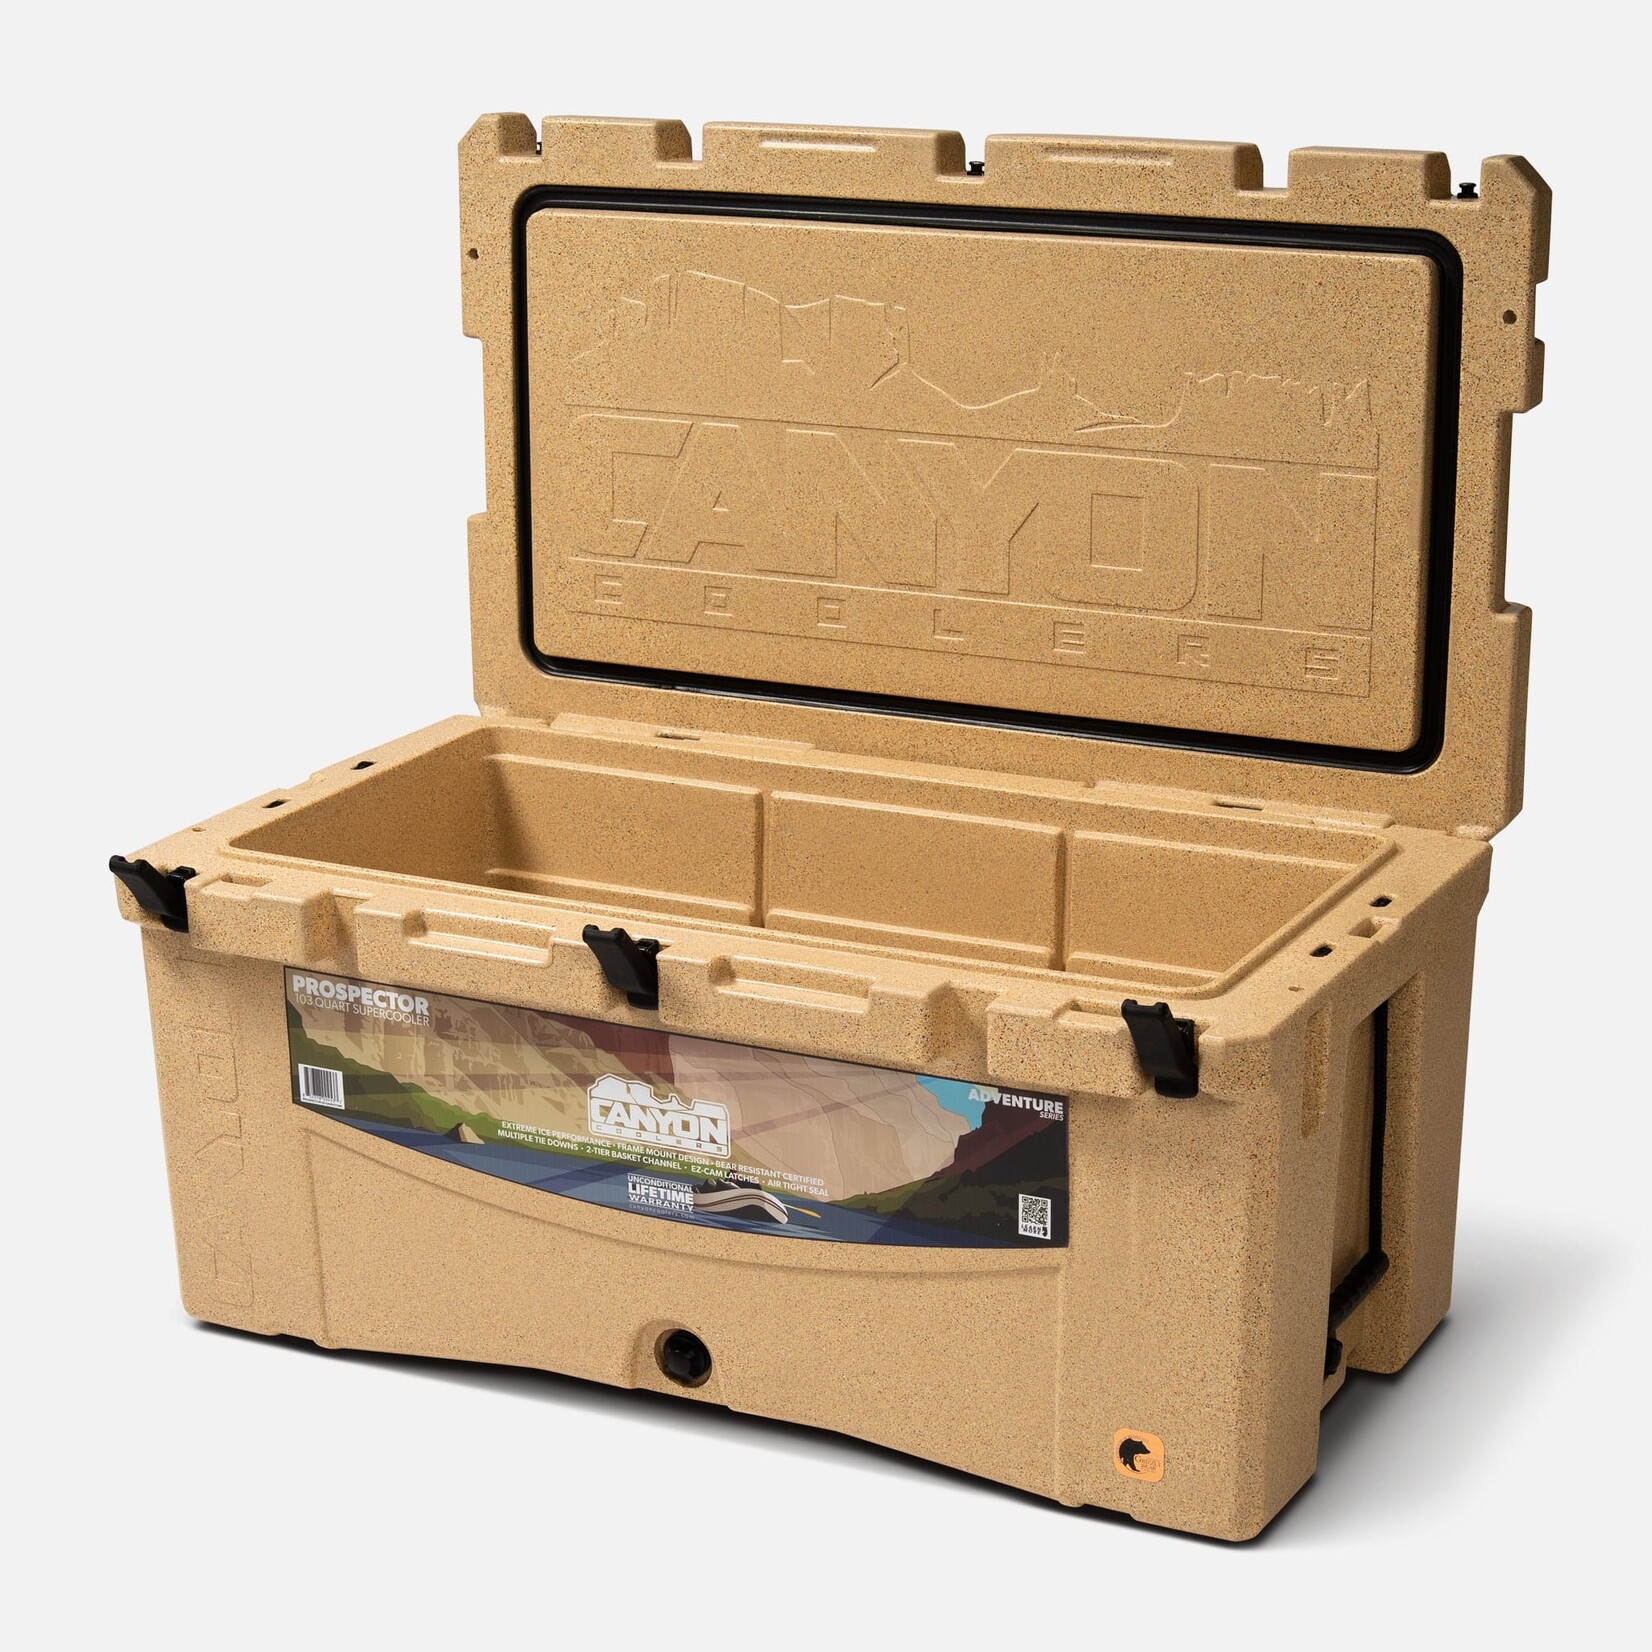 Canyon Coolers Canyon Cooler Prospector 103